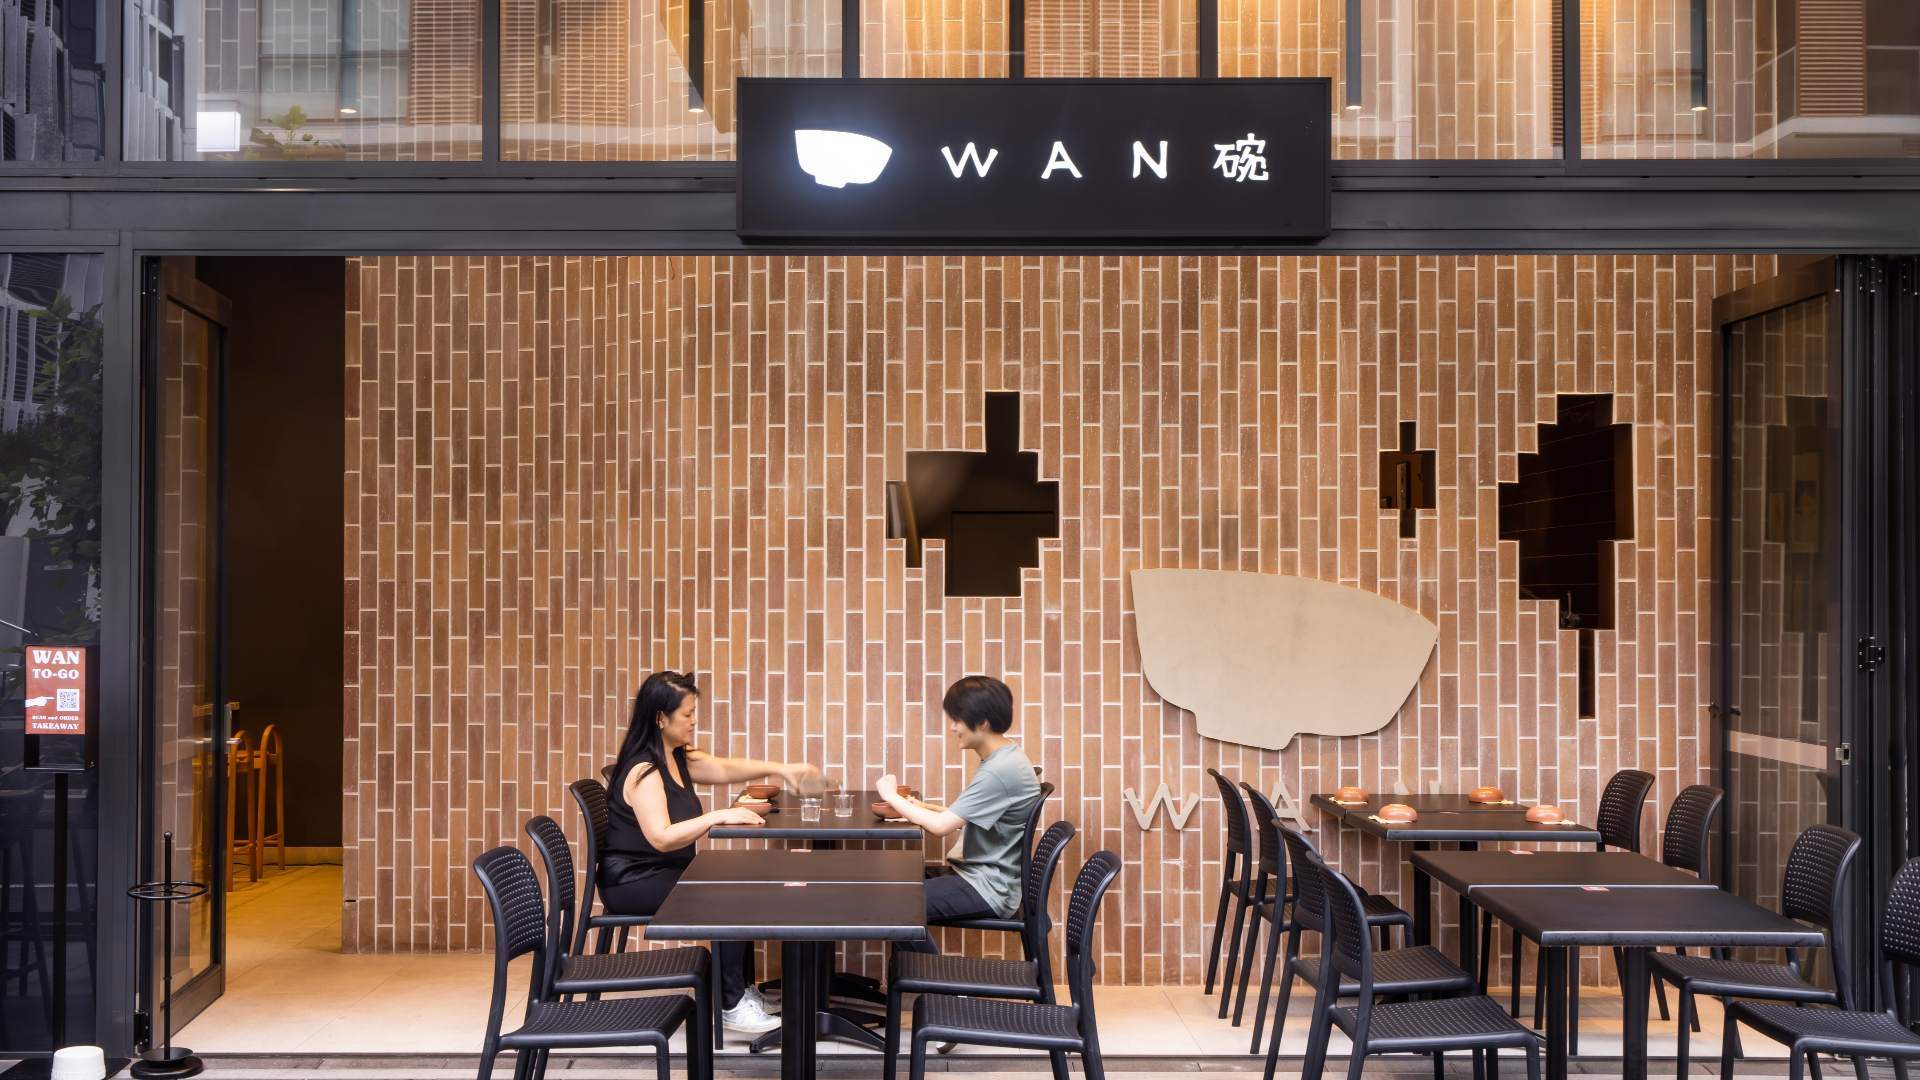 Meriton Has Opened a New Dining and Retail Precinct in Mascot Featuring Seven New Asian Eateries